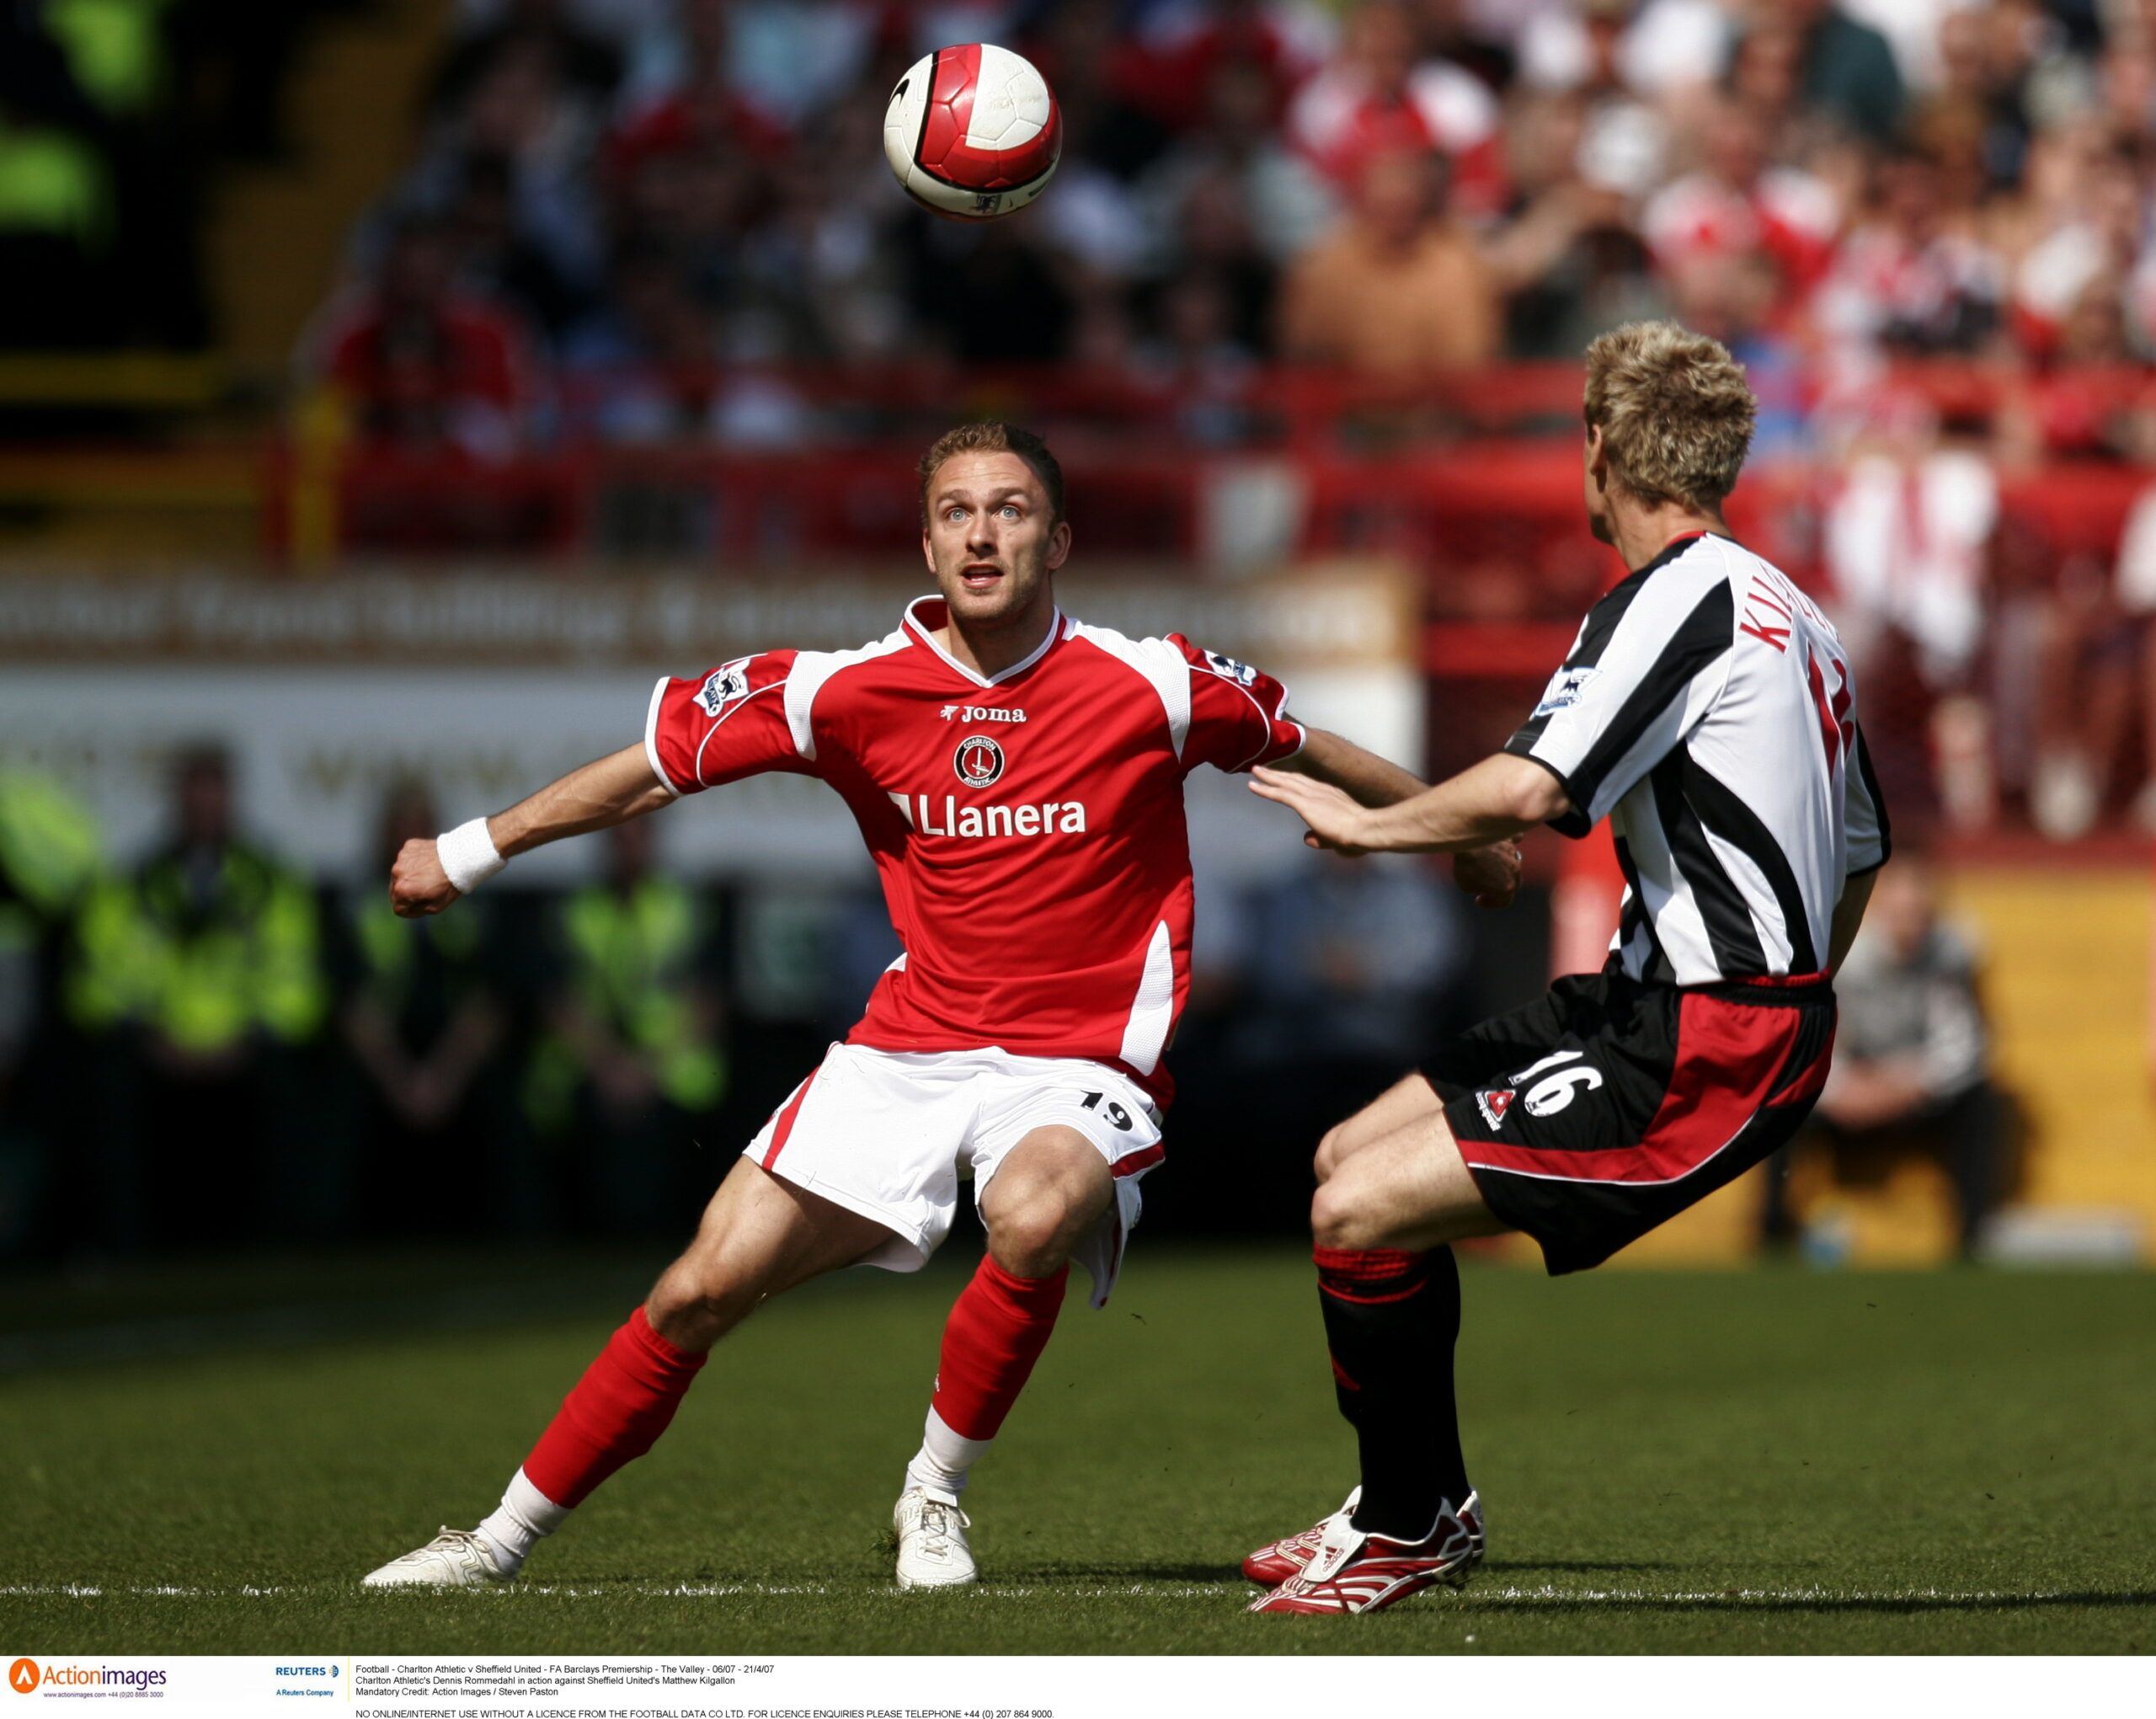 Football - Charlton Athletic v Sheffield United - FA Barclays Premiership - The Valley - 06/07 - 21/4/07 
Charlton Athletic's Dennis Rommedahl in action against Sheffield United's Matthew Kilgallon 
Mandatory Credit: Action Images / Steven Paston 
NO ONLINE/INTERNET USE WITHOUT A LICENCE FROM THE FOOTBALL DATA CO LTD. FOR LICENCE ENQUIRIES PLEASE TELEPHONE +44 (0) 207 864 9000.